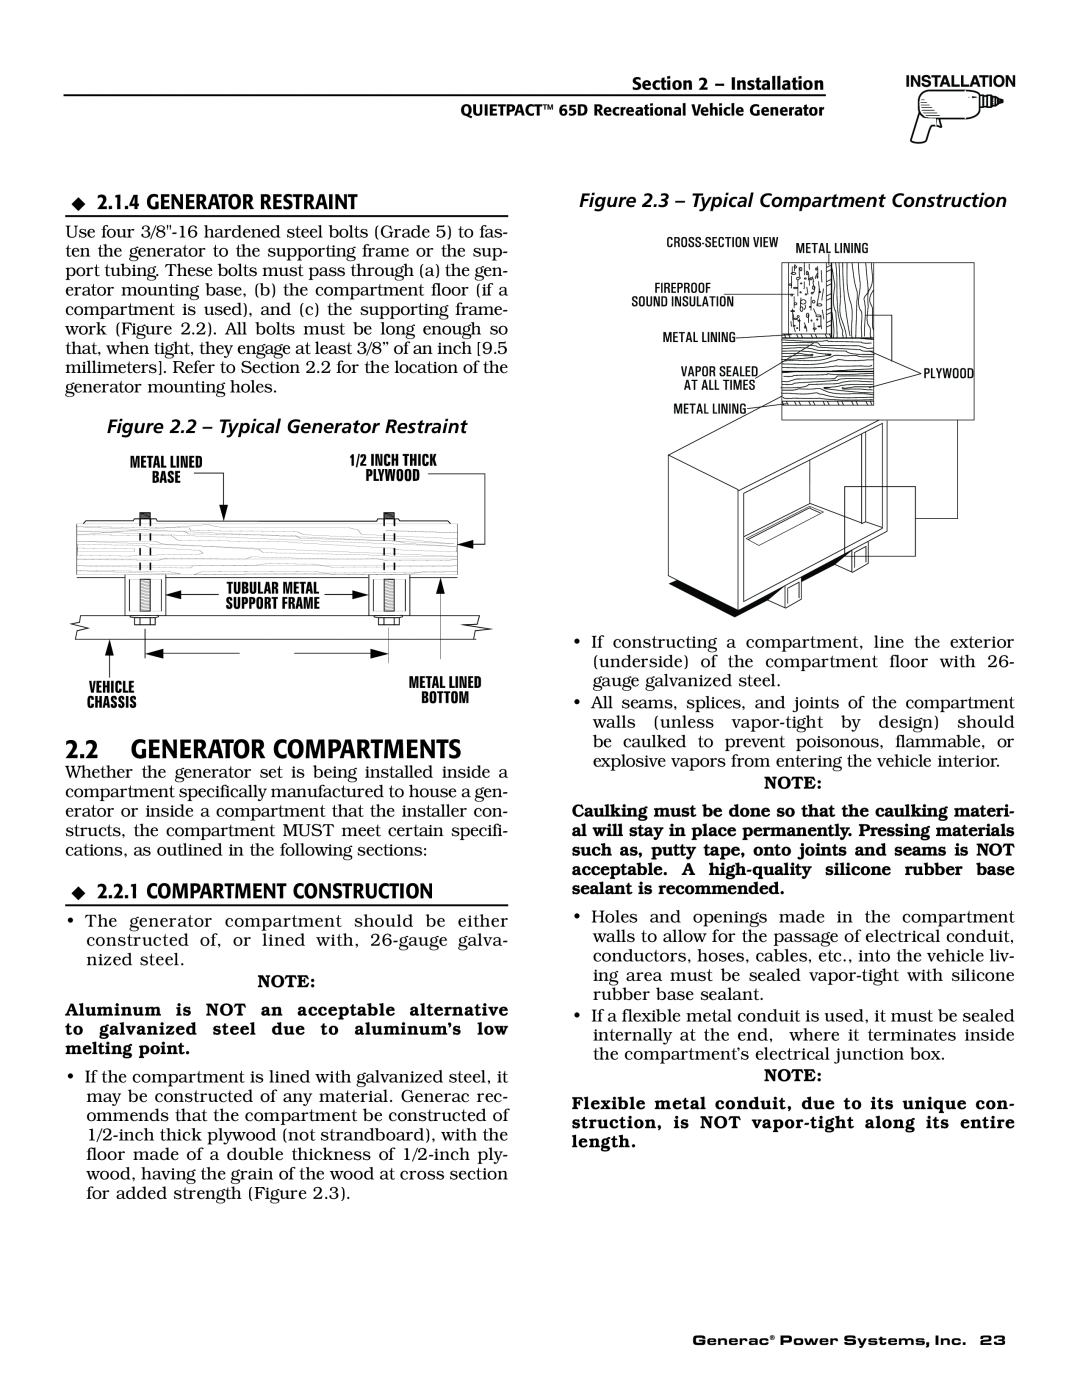 Generac 004614-1 owner manual Generator Compartments, Compartment Construction, 2 - Typical Generator Restraint 